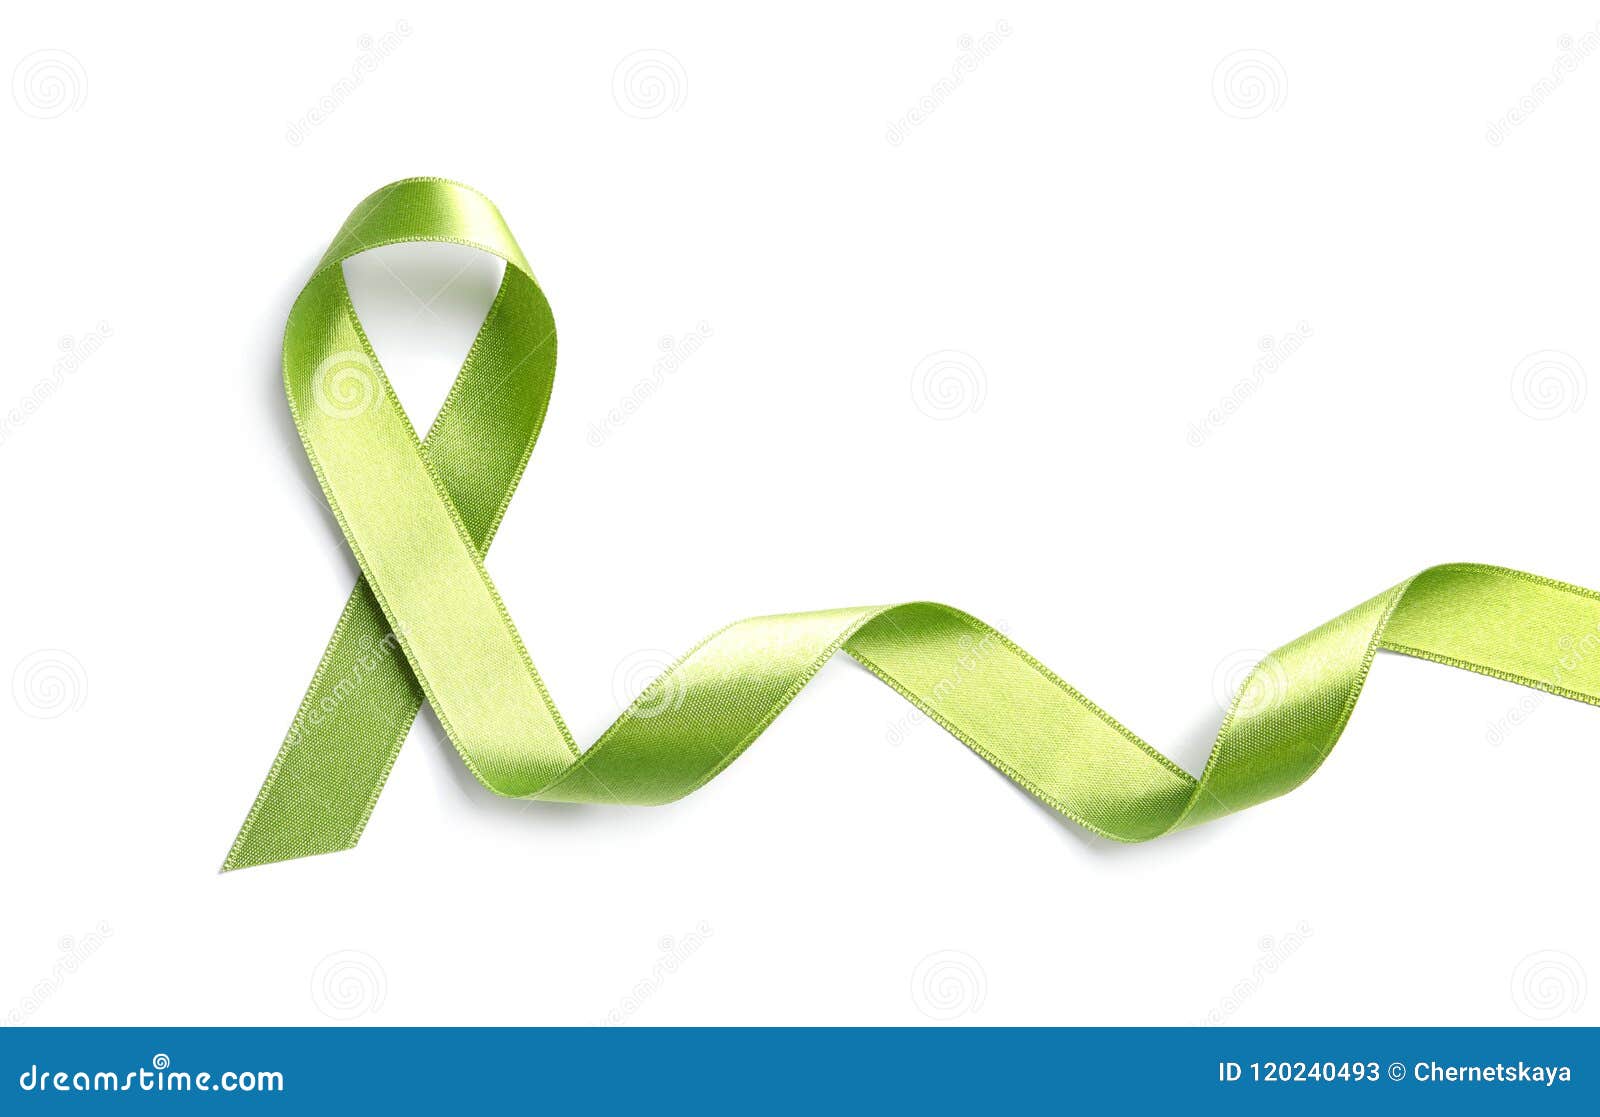 Emerald Green Ribbon Awareness Liver Cancer Liver Disease Mental Health  Isolated On White Background Vector Illustration Stock Illustration -  Download Image Now - iStock